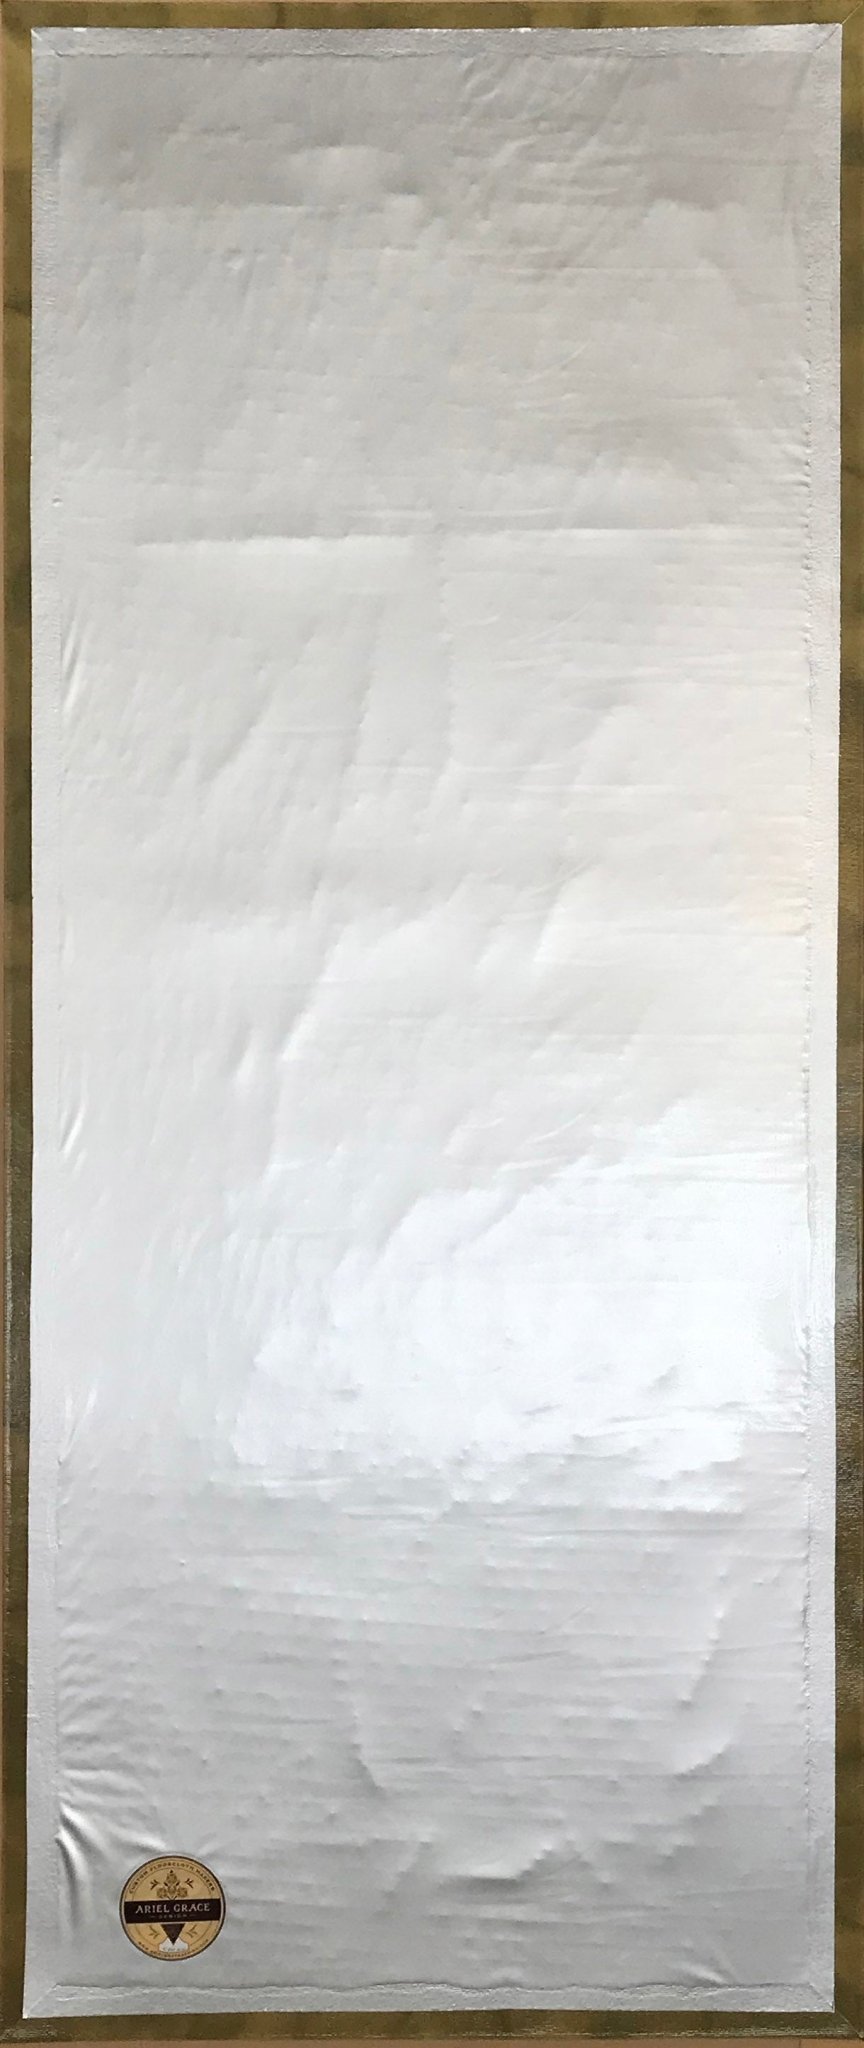 The backside of this floorcloth, showing the waterproof vinyl layer which is adhered to the hem.  There is a layer of carpet padding sealed between the vinyl and the canvas.